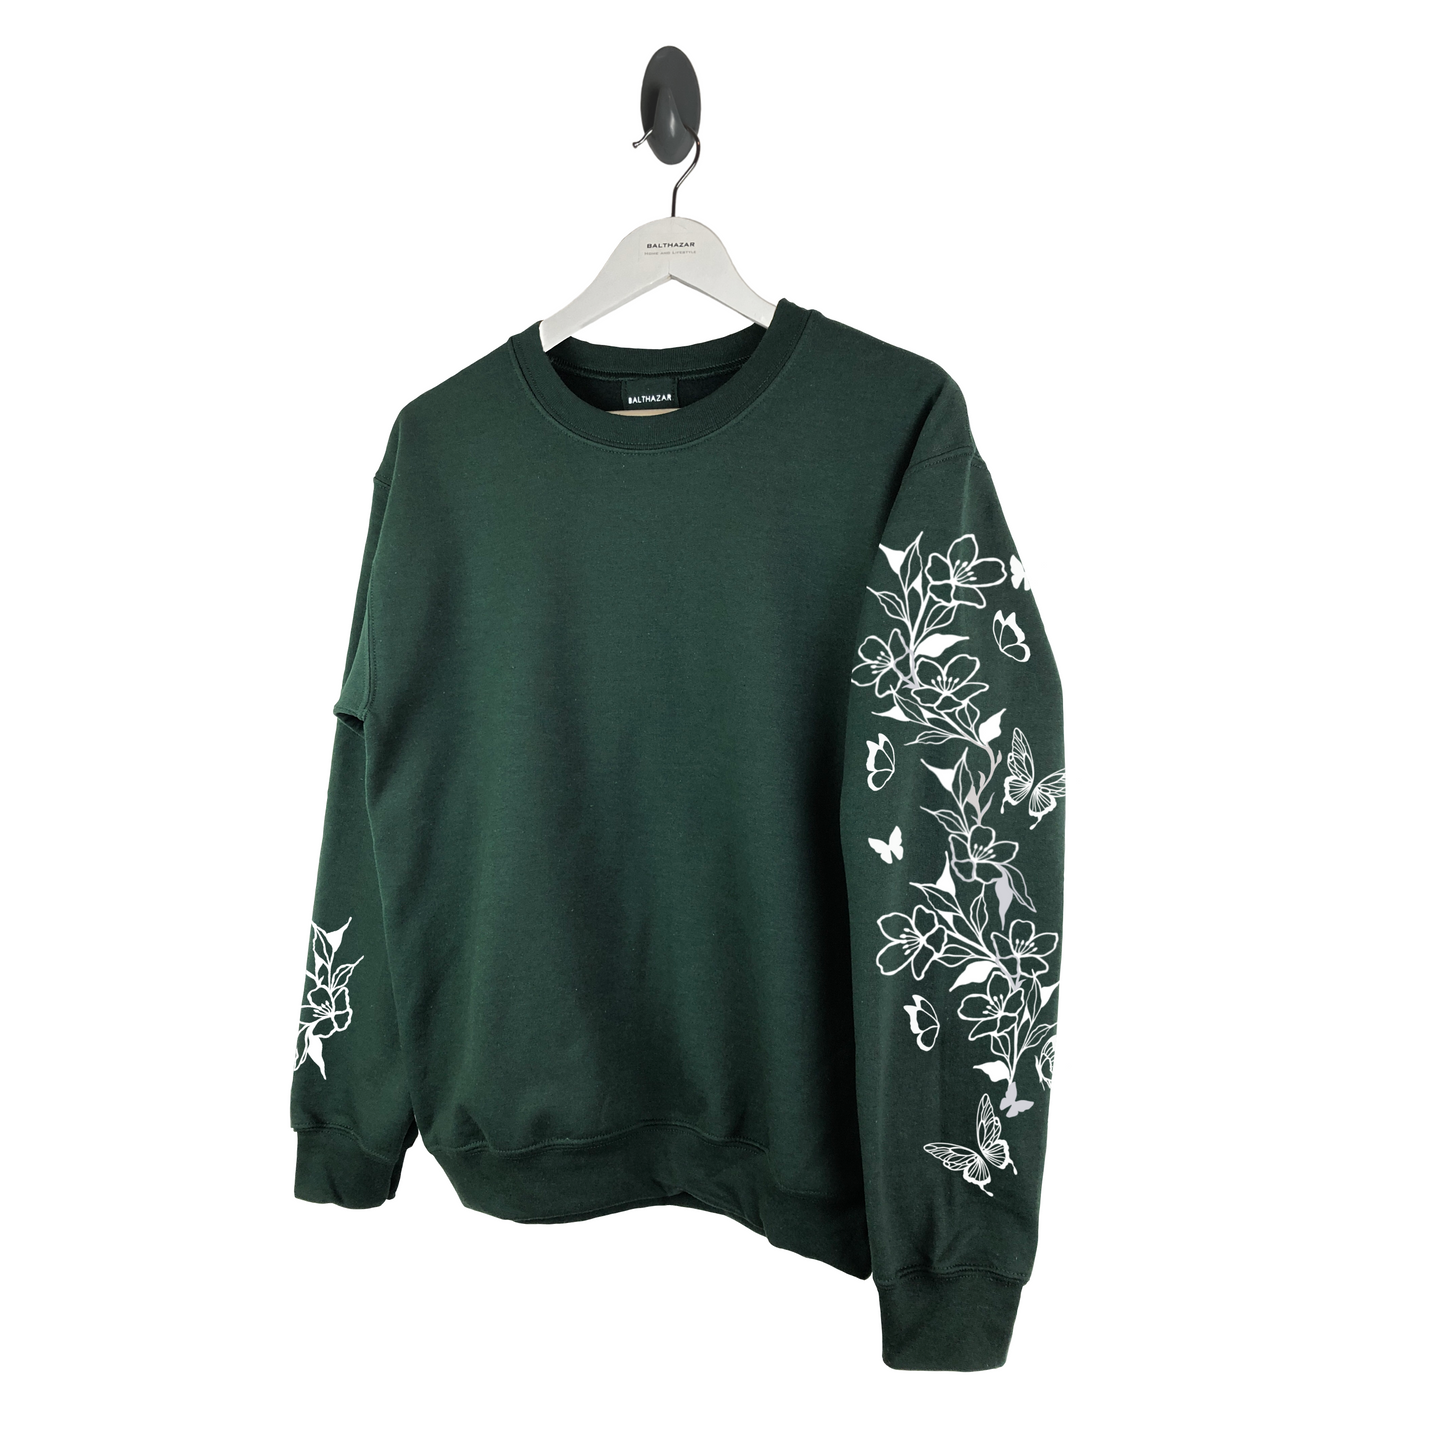 Statement floral butterfly sleeved sweatshirt- customisable